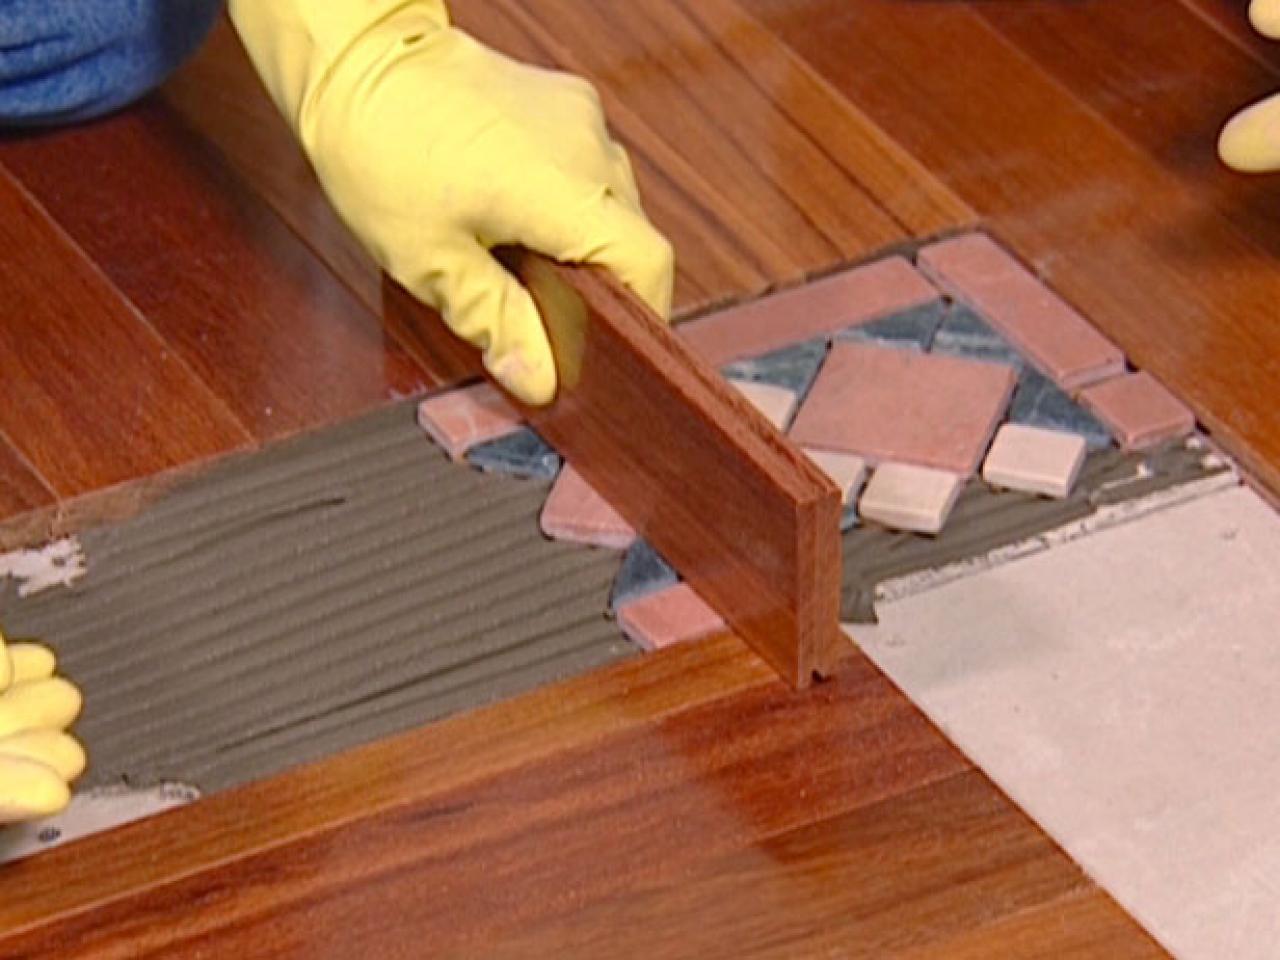 How To Install A Mixed Media Floor, Tile And Wood Floor Combination